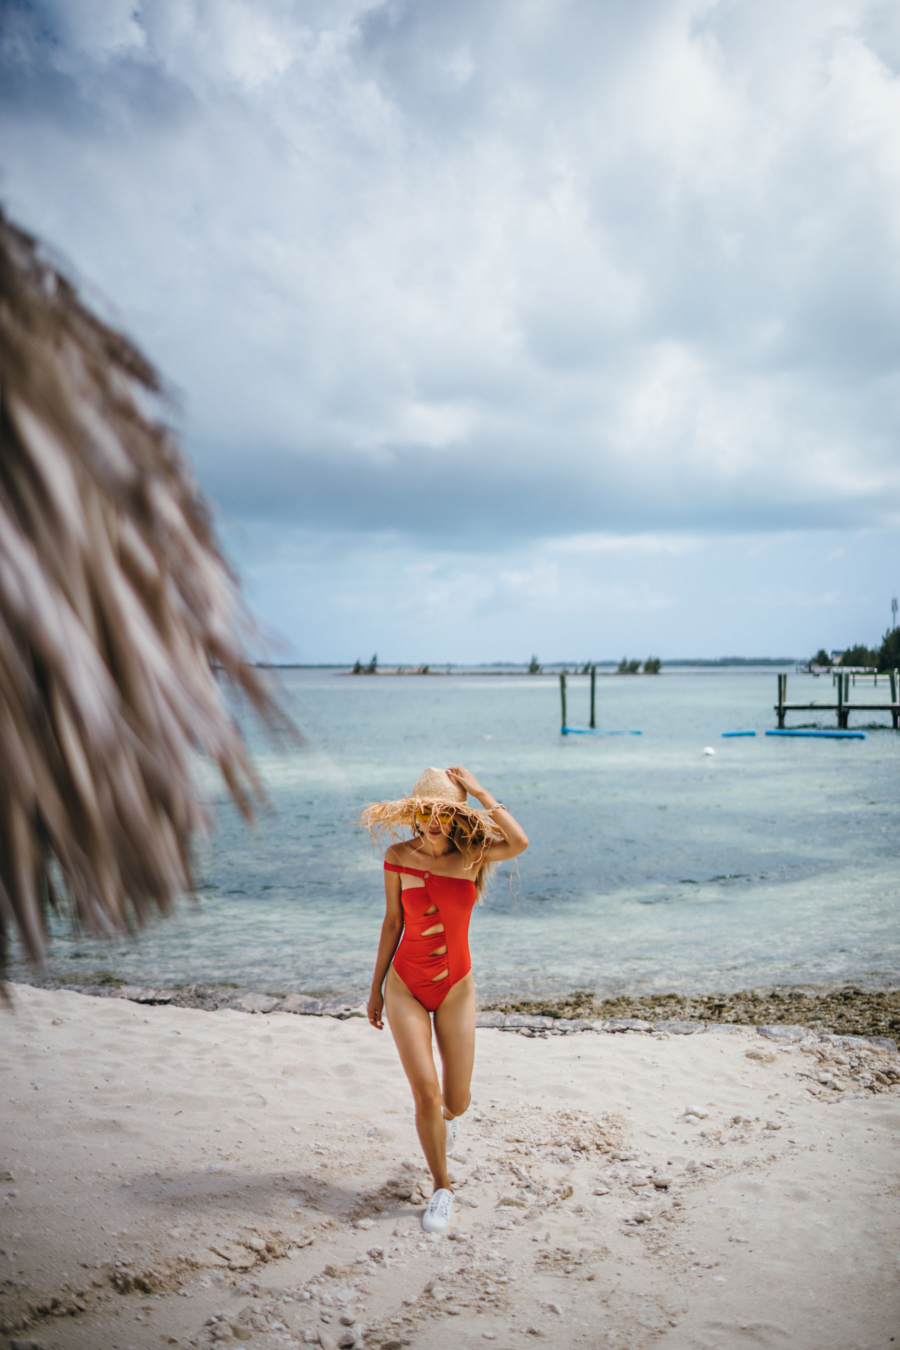 Bimini Beach Red One Piece Swimsuit - How To Find The Perfect One Piece Swimsuit // NotJessFashion.com